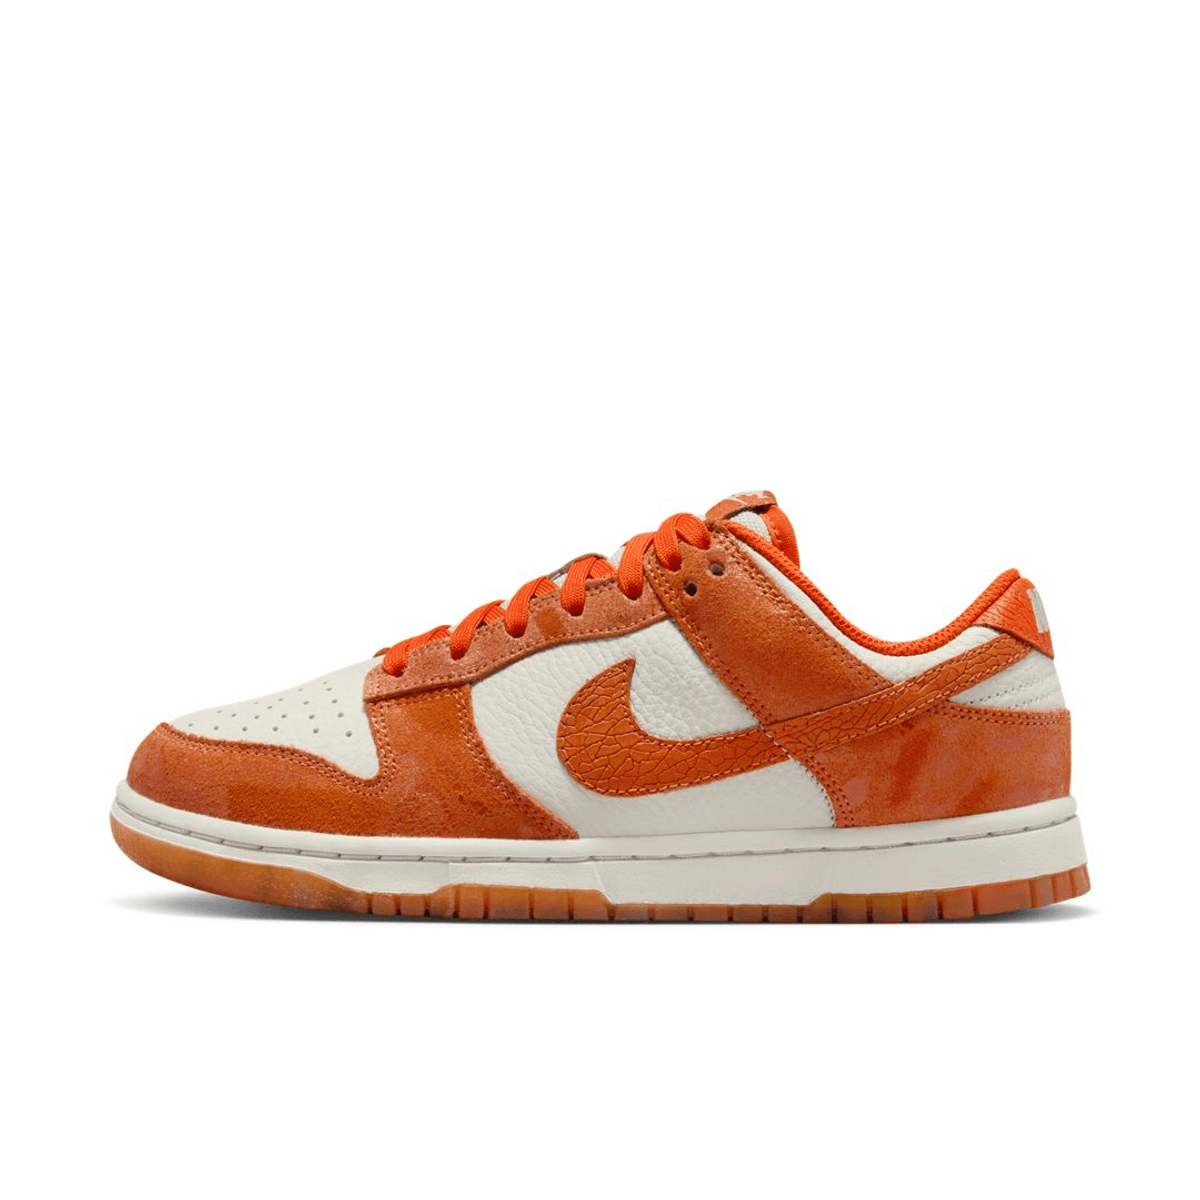 Nike Dunk Low Cracked Orange Brings A New Look To A Classic Colorway